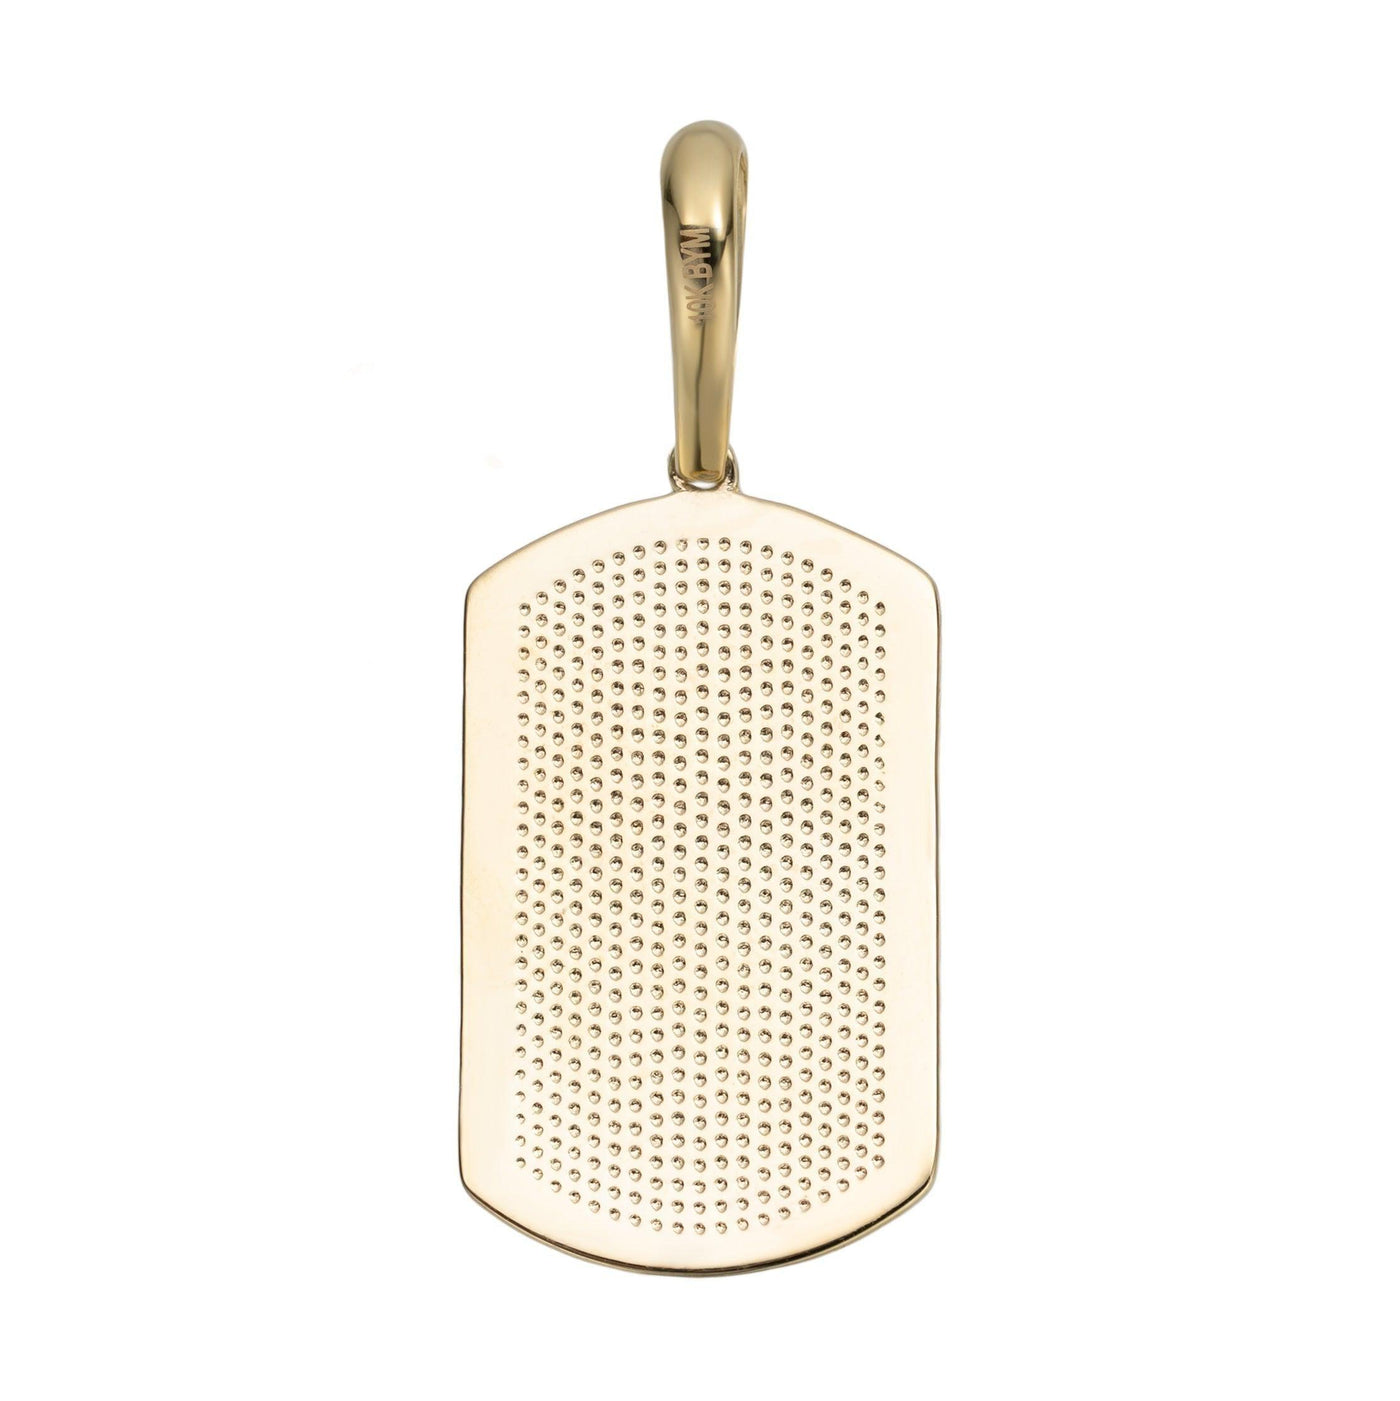 2" Textured Dog Tag Pendant Solid 10K Yellow Gold - bayamjewelry